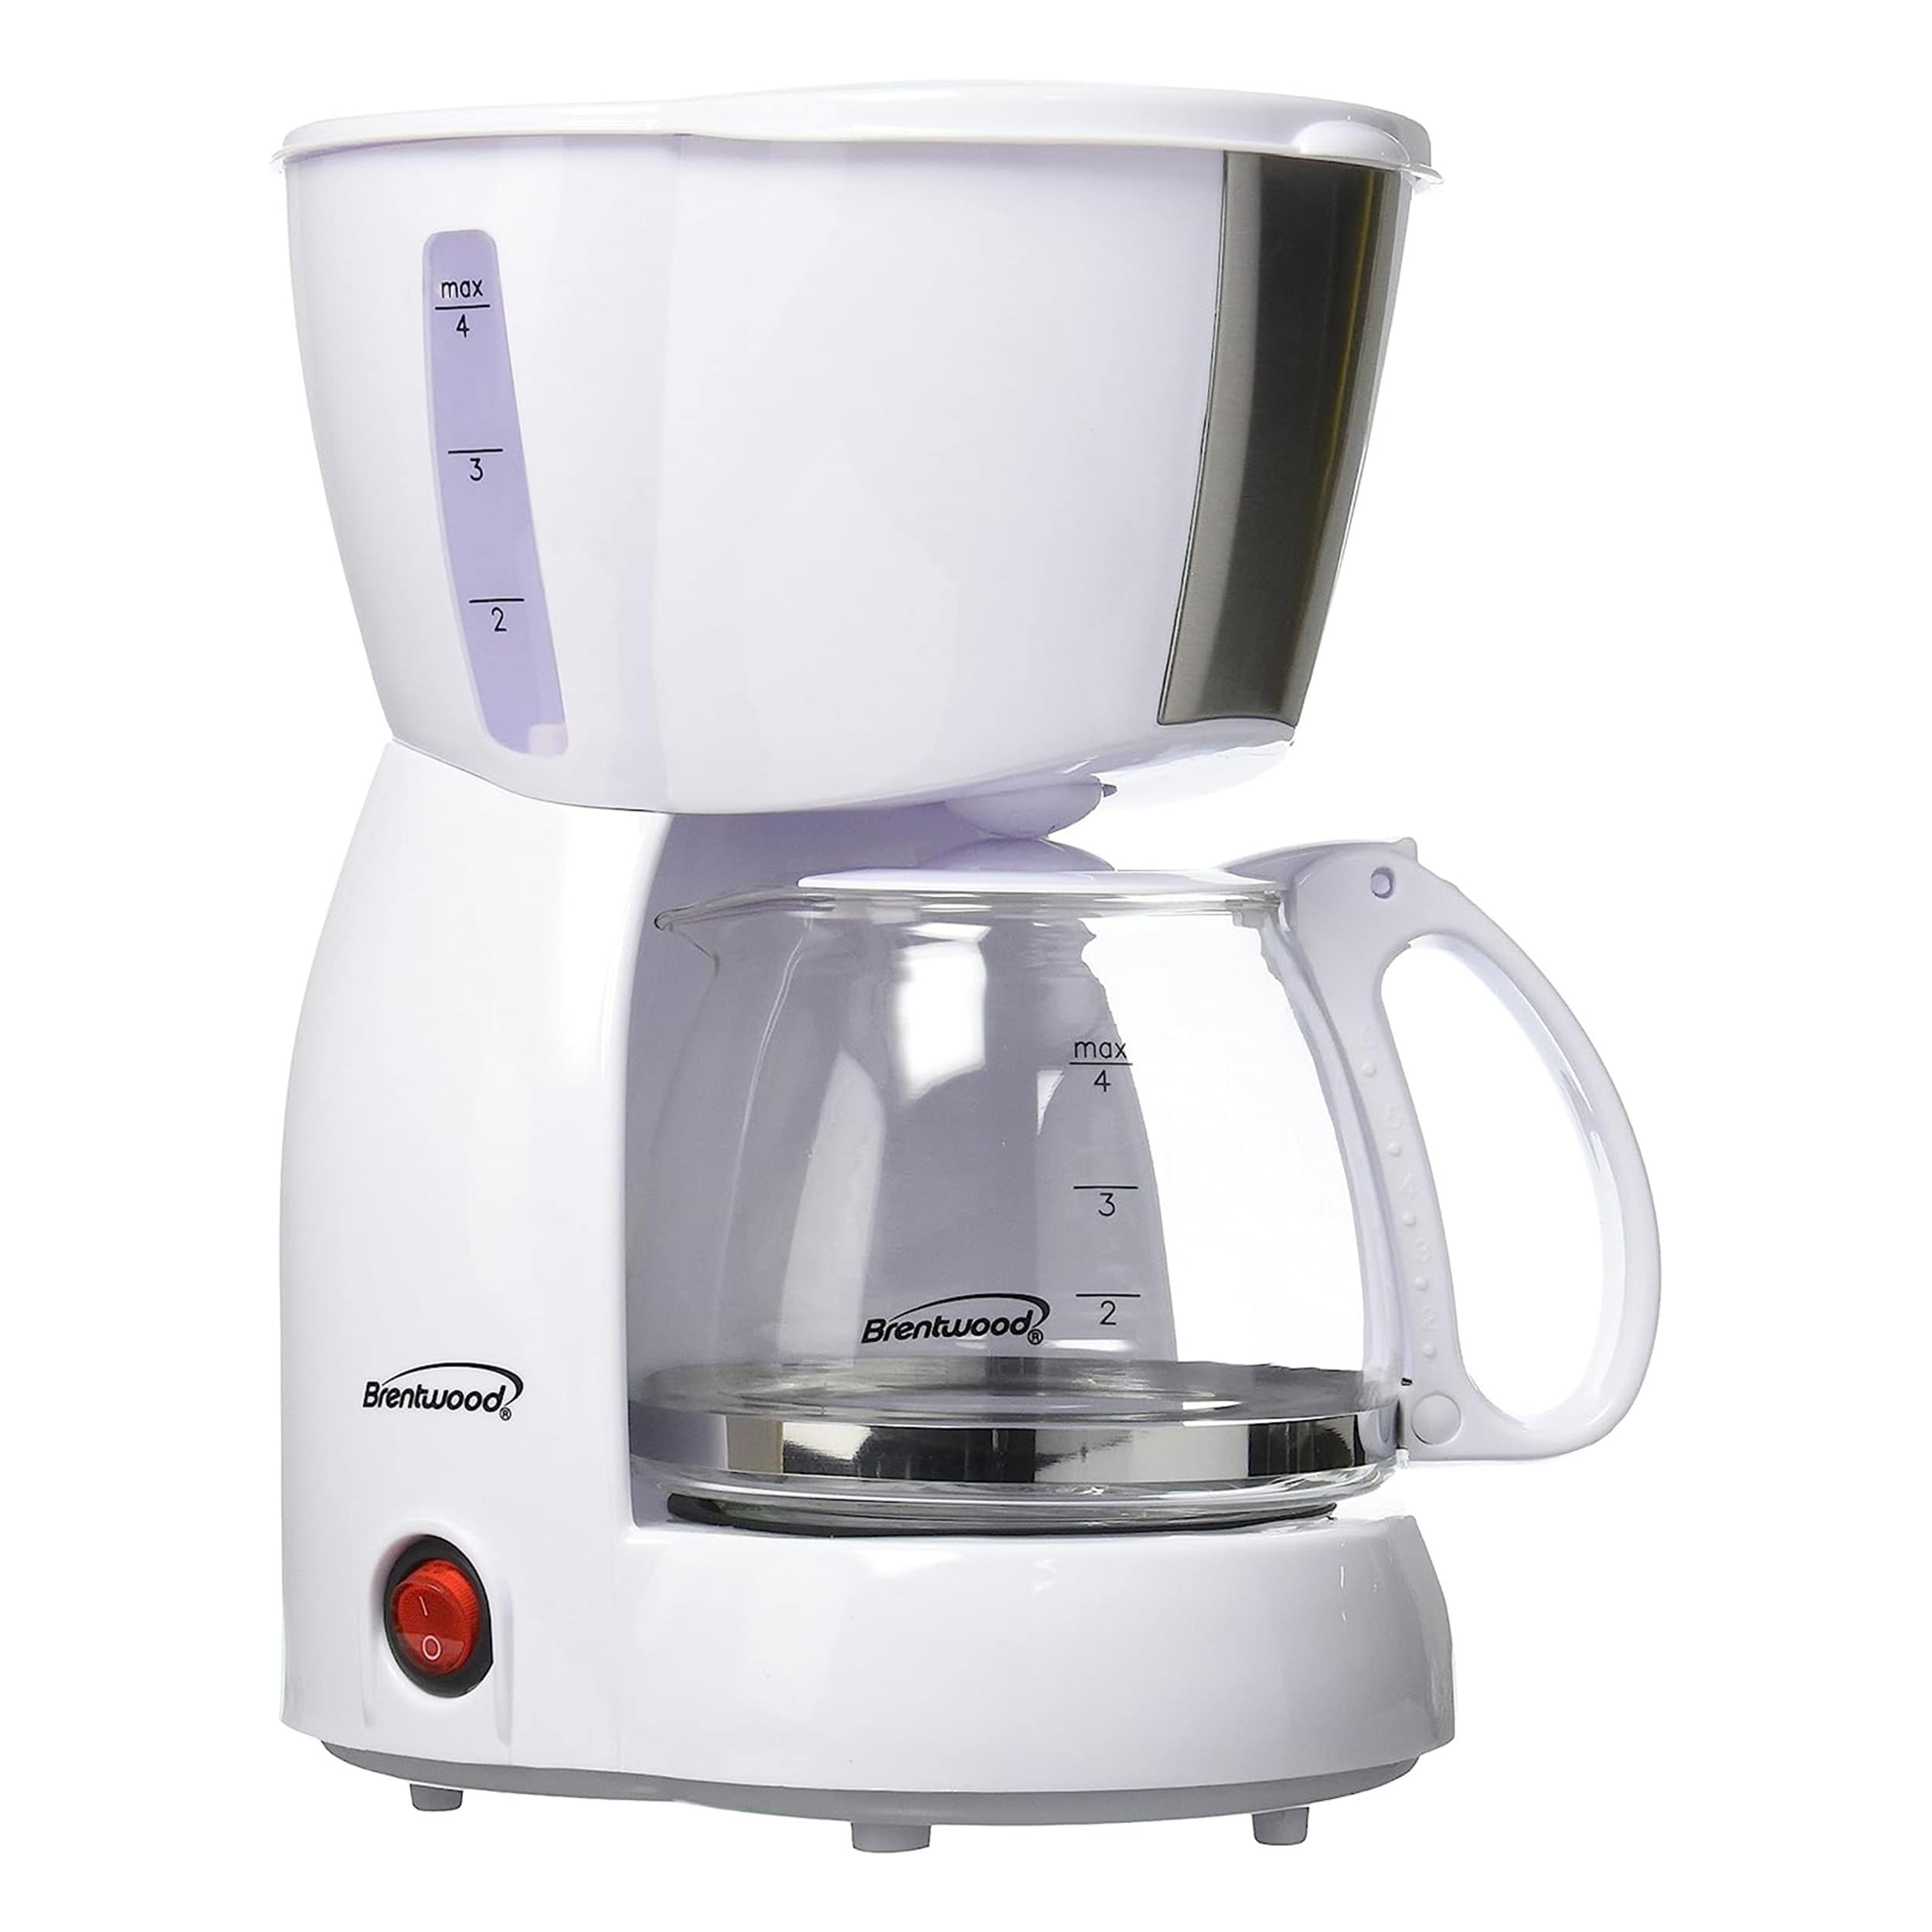 https://ak1.ostkcdn.com/images/products/is/images/direct/1aea9197bcd7cad54b1a9a984cb9165d426a634f/4-Cup-Coffee-Maker-in-White.jpg